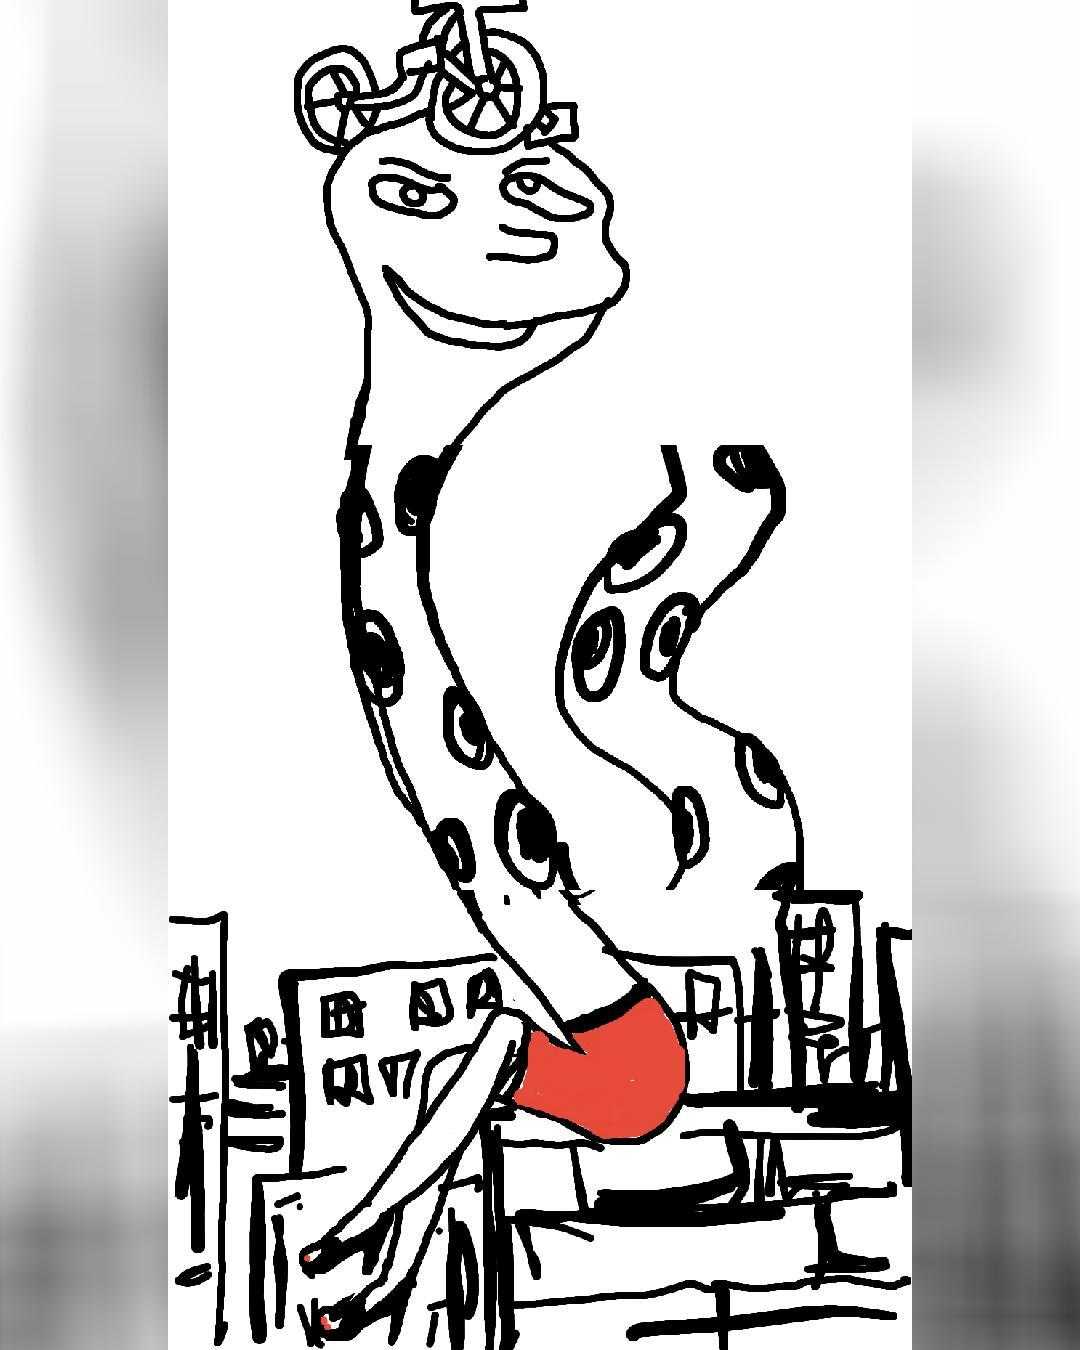 Exquisite corpse by shangrilapna, Stenisles, Noone
.
One drawing, 3 artists.
Try out ScribbleX – the Exquisite Corpse App 🎨🖌
It's free 🤗 www.scribblex.com
.
.
.
#scribblex #drawing #draw #art #scribbleart #scribble #sketch #sketchbook #sketchart #artwork #creative #app #game #drawinggame #exquisitecorpse #abstractart #surrealism #surrealismworld #collaborativedrawing #collaborativeart #instaart #zeichnen #kunst #disegno #arte